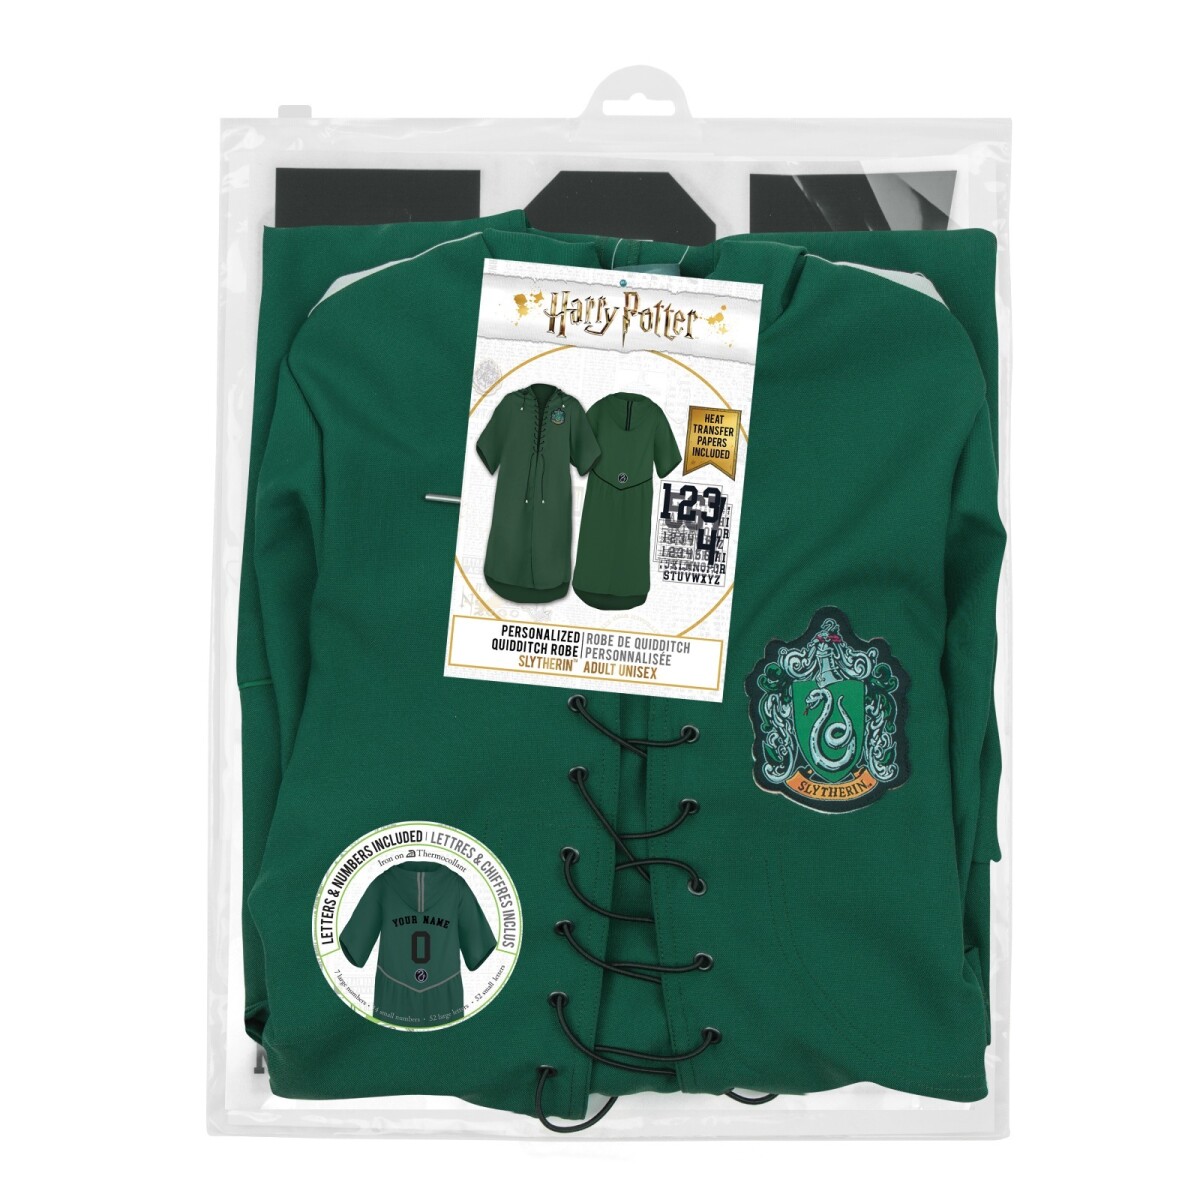 Harry Potter Tuníca Wizard - Quidditch Personalized Slytherin (XS) 